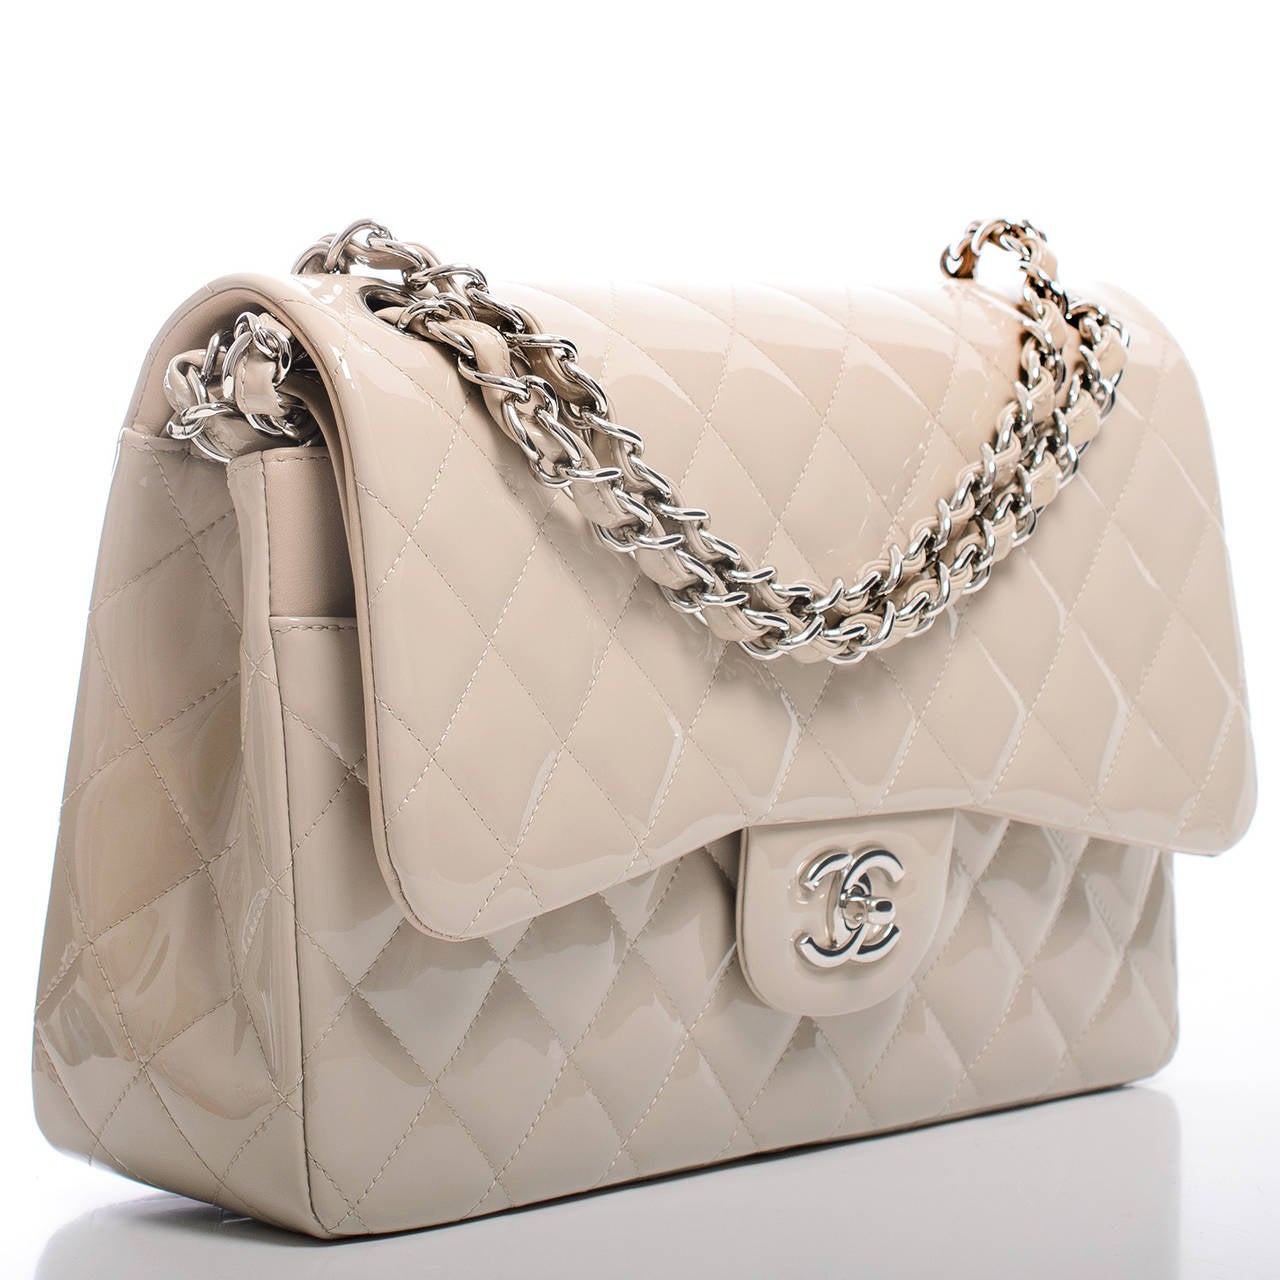 Chanel light beige Jumbo Classic double flap in patent leather with silver tone hardware.

This limited edition light beige quilted patent Jumbo Classic double flap features a front flap CC turnlock closure, half moon back pocket and adjustable